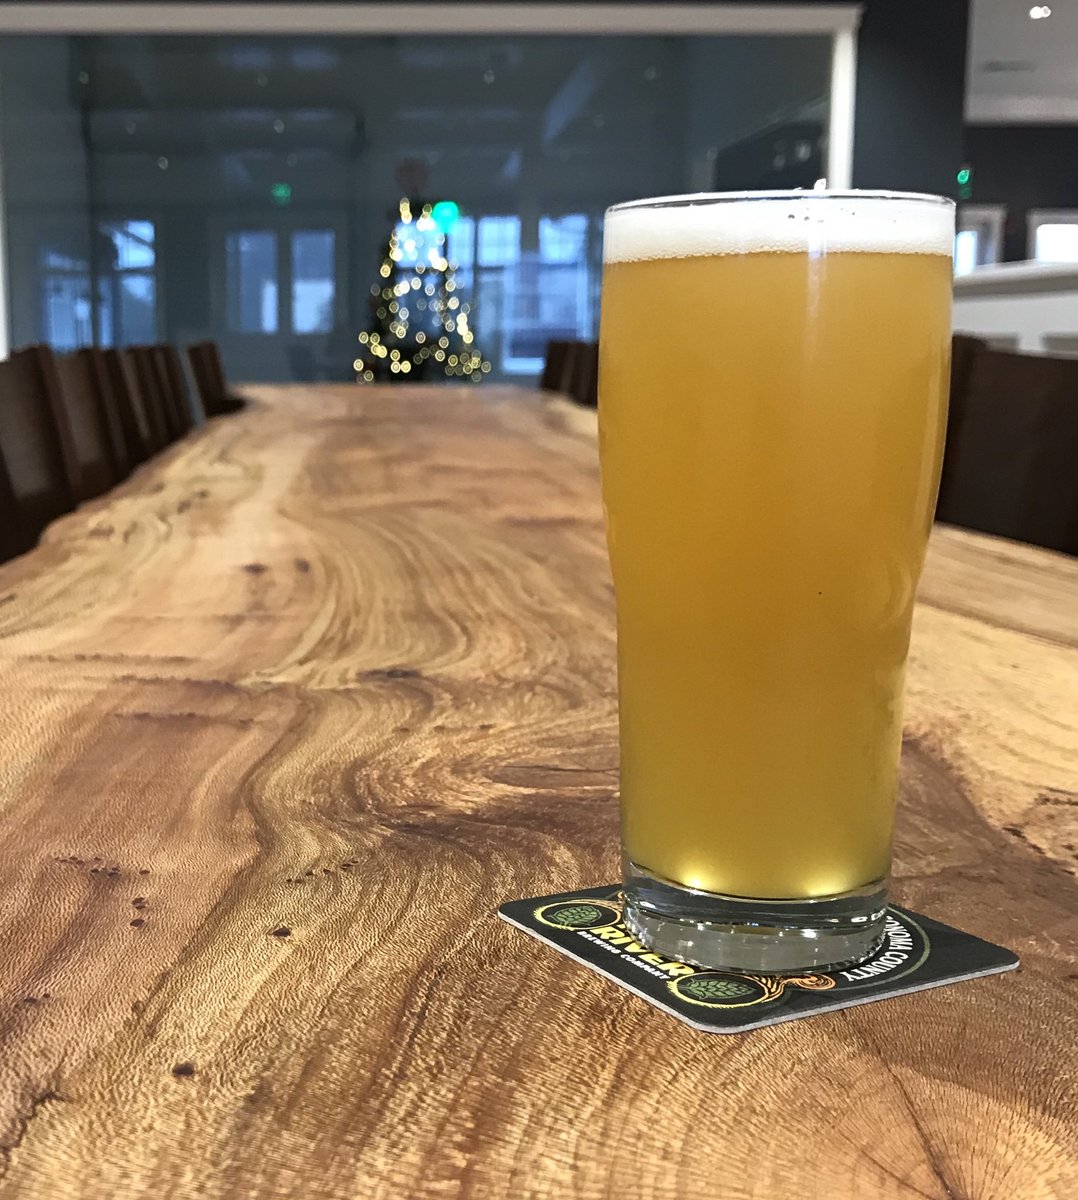 Resilience IPA now on tap at both our Santa Rosa and Windsor brewpubs!  100% of the proceeds donated to #buttecounty fire victims.  Thank you @SierraNevada for inviting us to help out!  #resilienceipa #campfireparadise #craftbeer